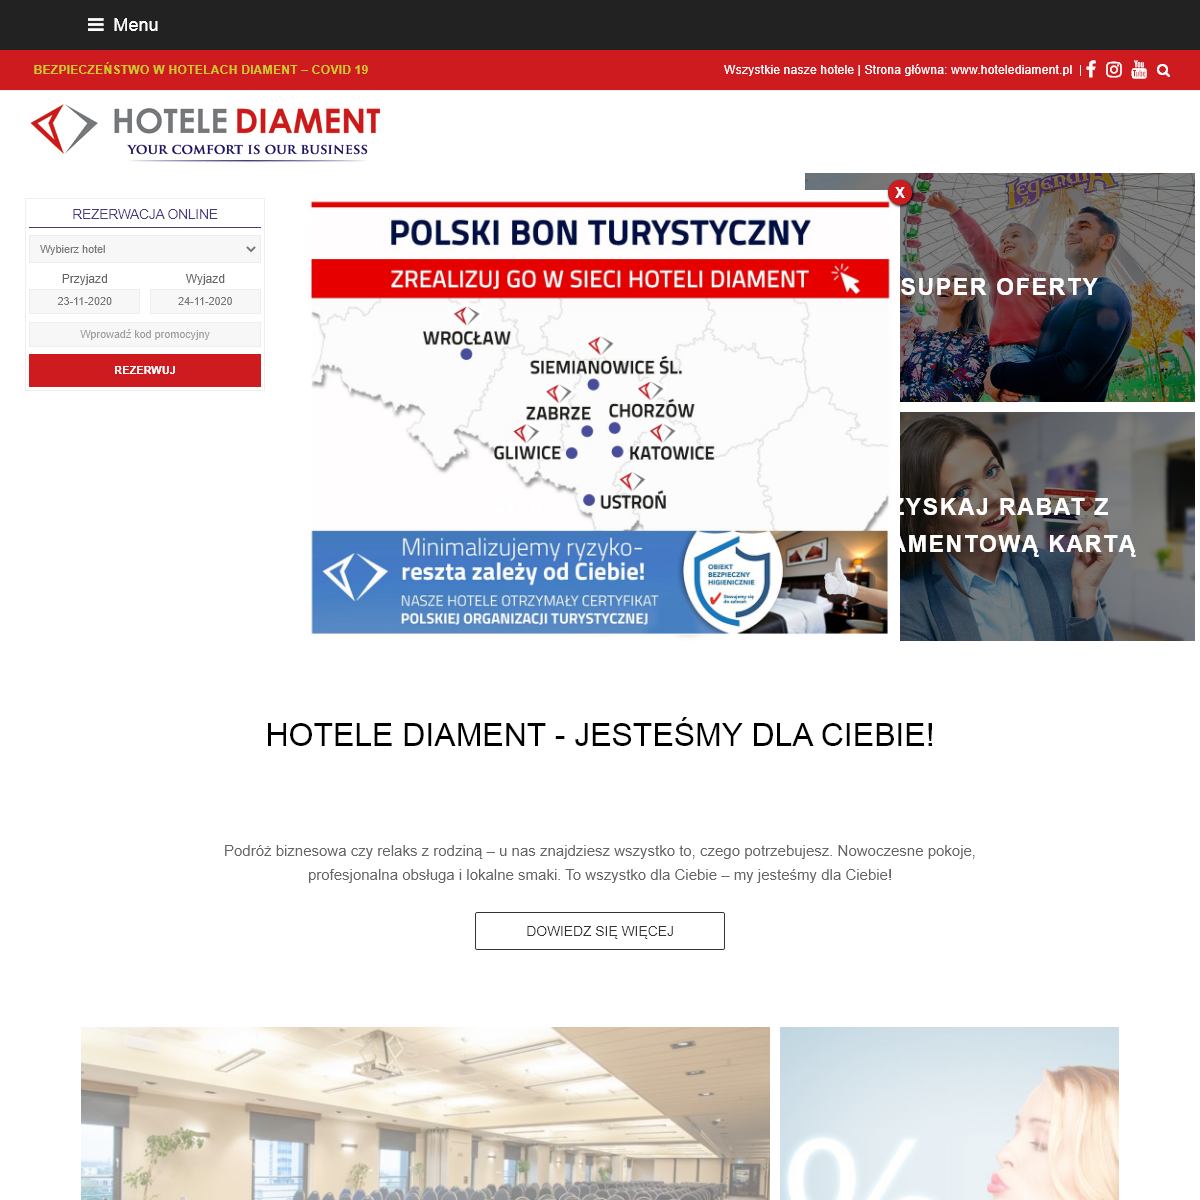 A complete backup of hotelediament.pl